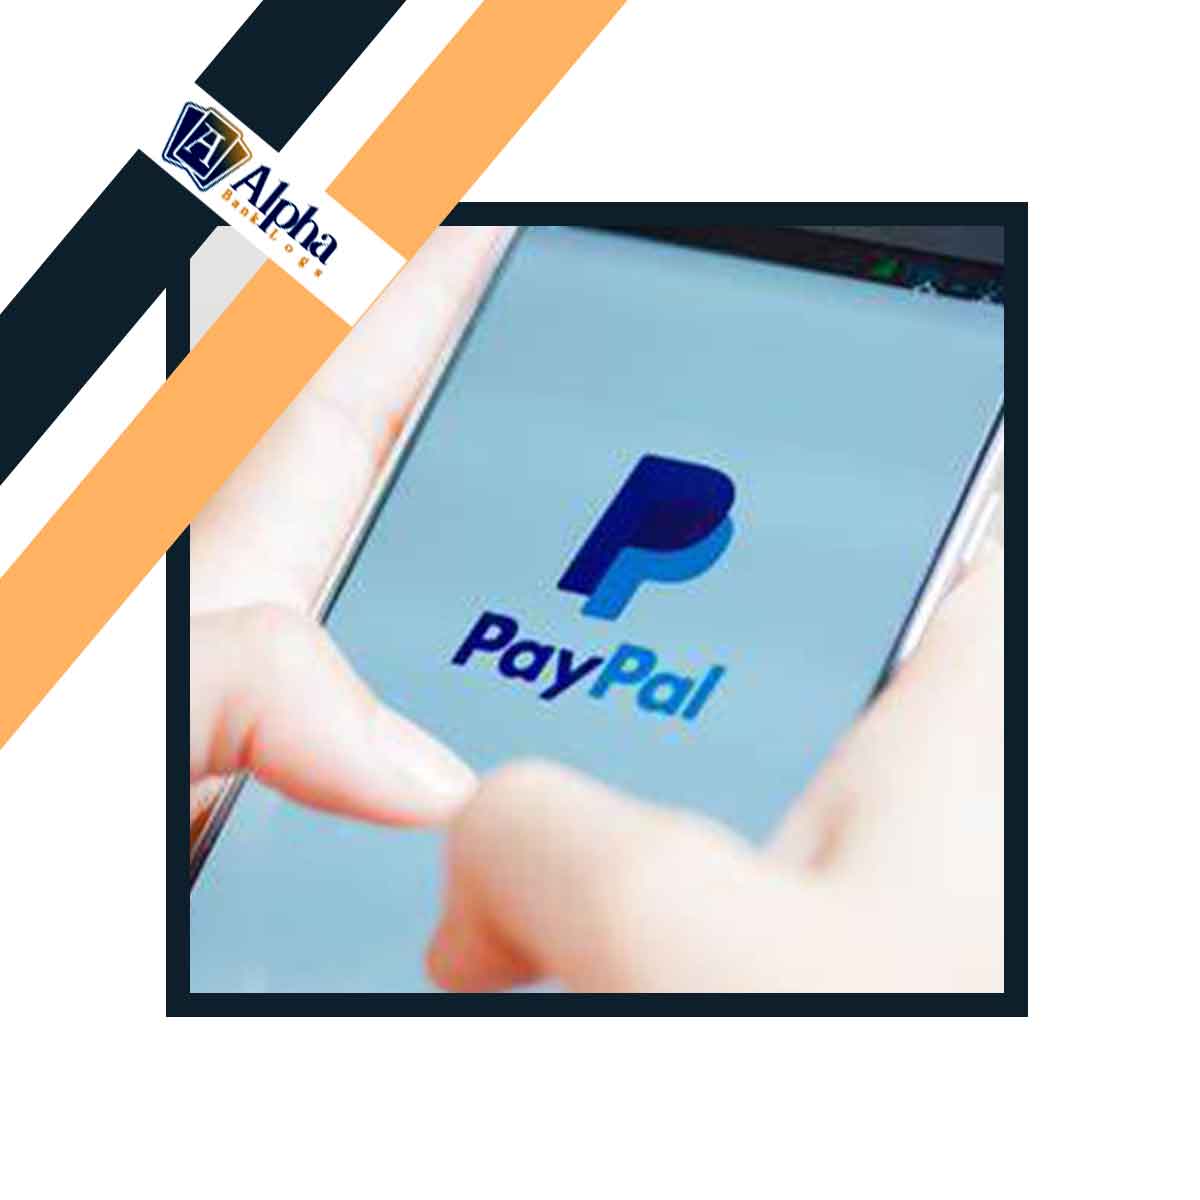 HQ UK Business PayPal Account with NO 21 Days HOLD + 2 Transfers